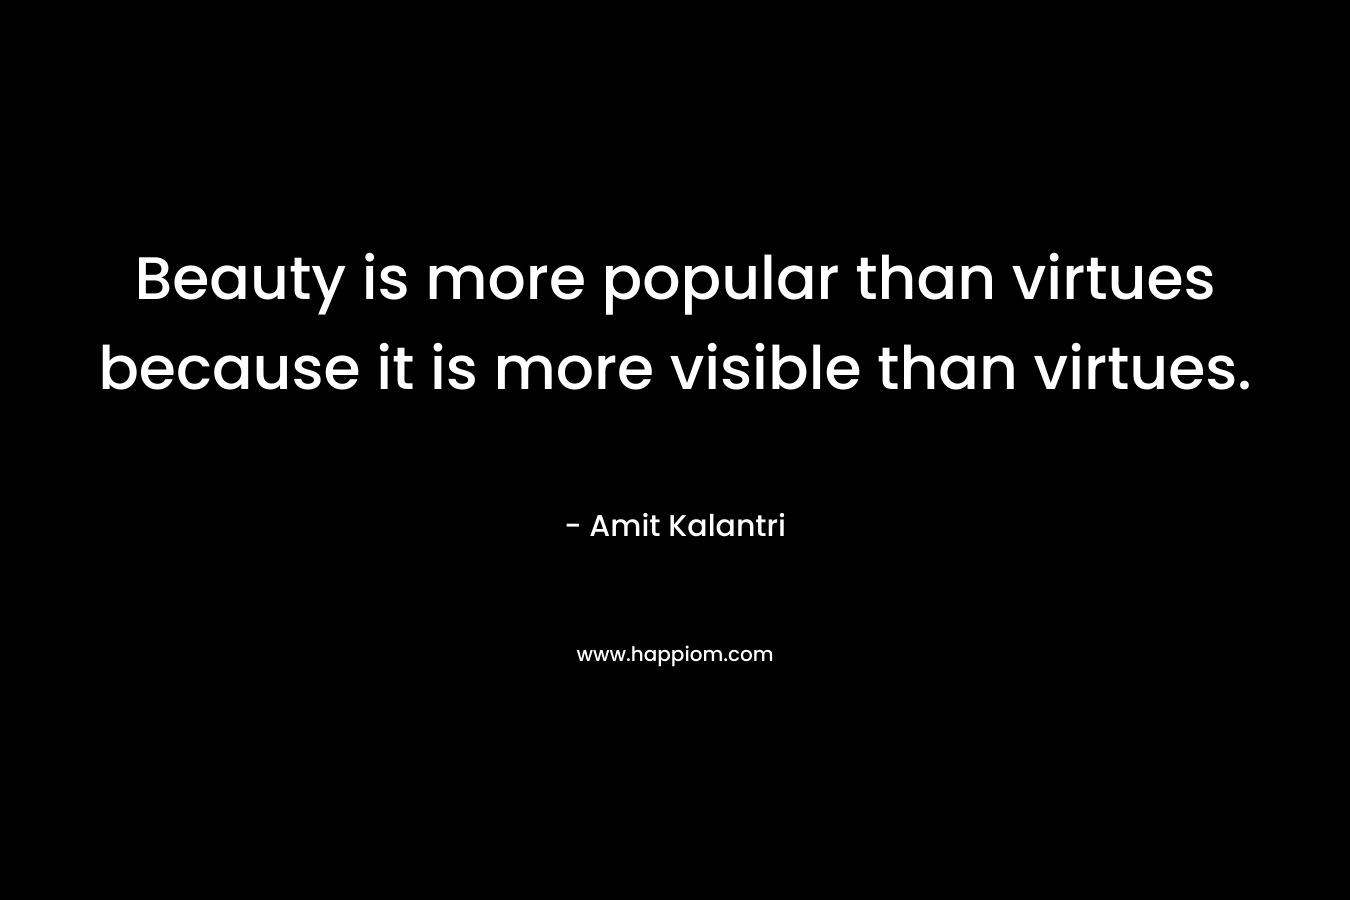 Beauty is more popular than virtues because it is more visible than virtues.